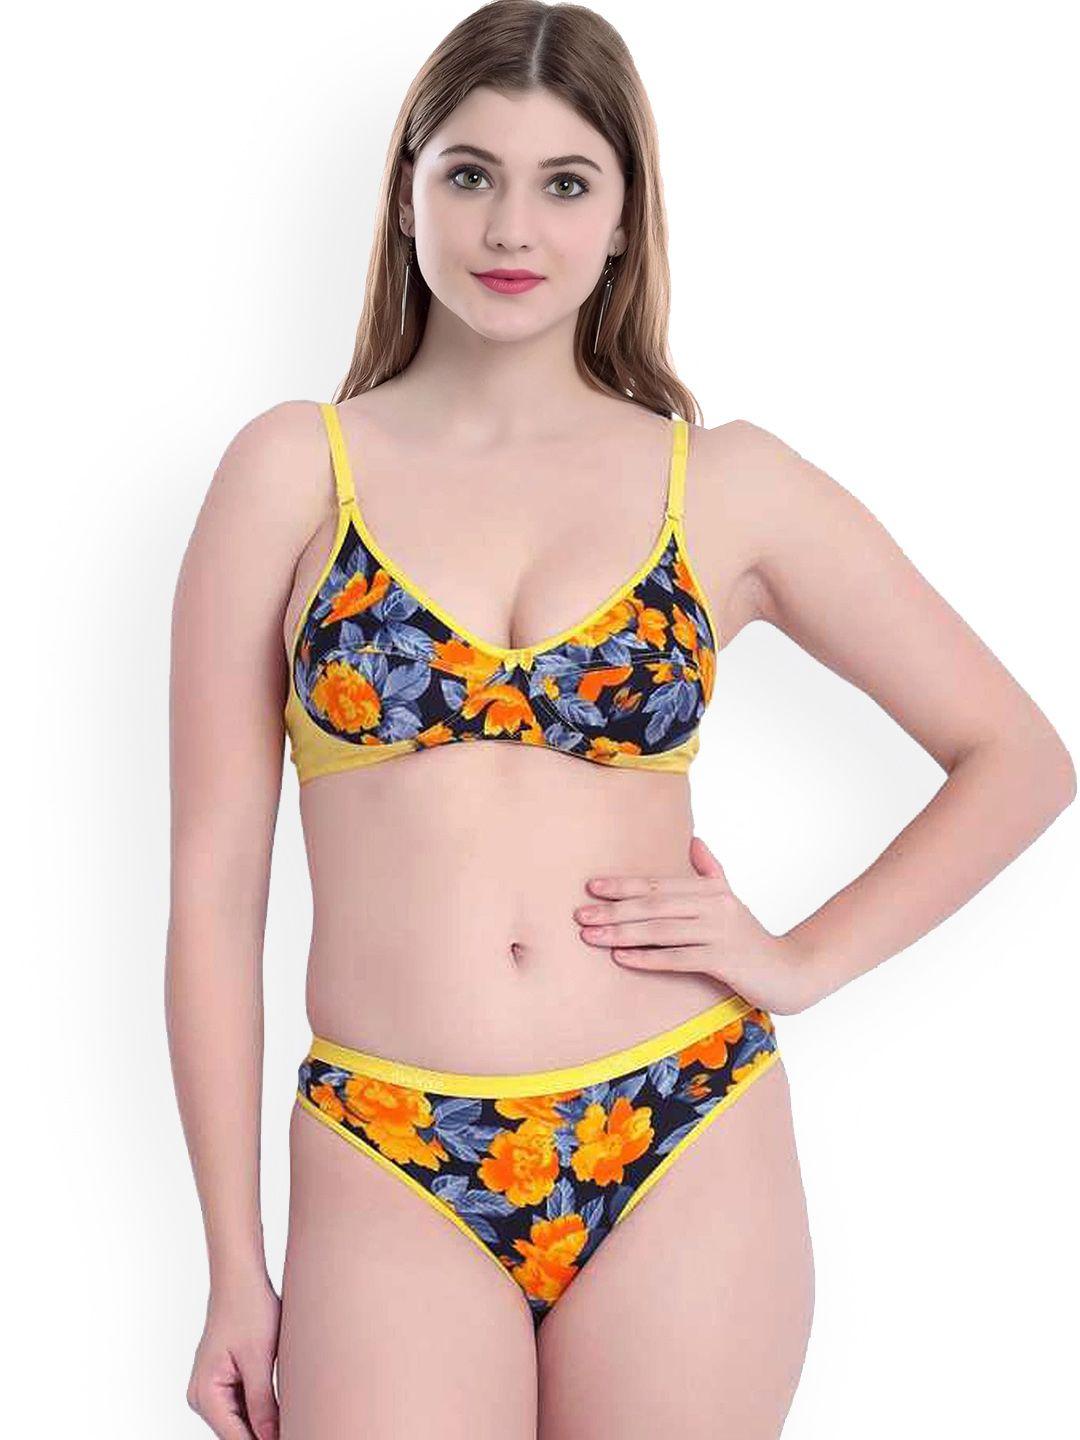 arousy printed cotton non-padded lingerie set by_sunflower set_yellow_30